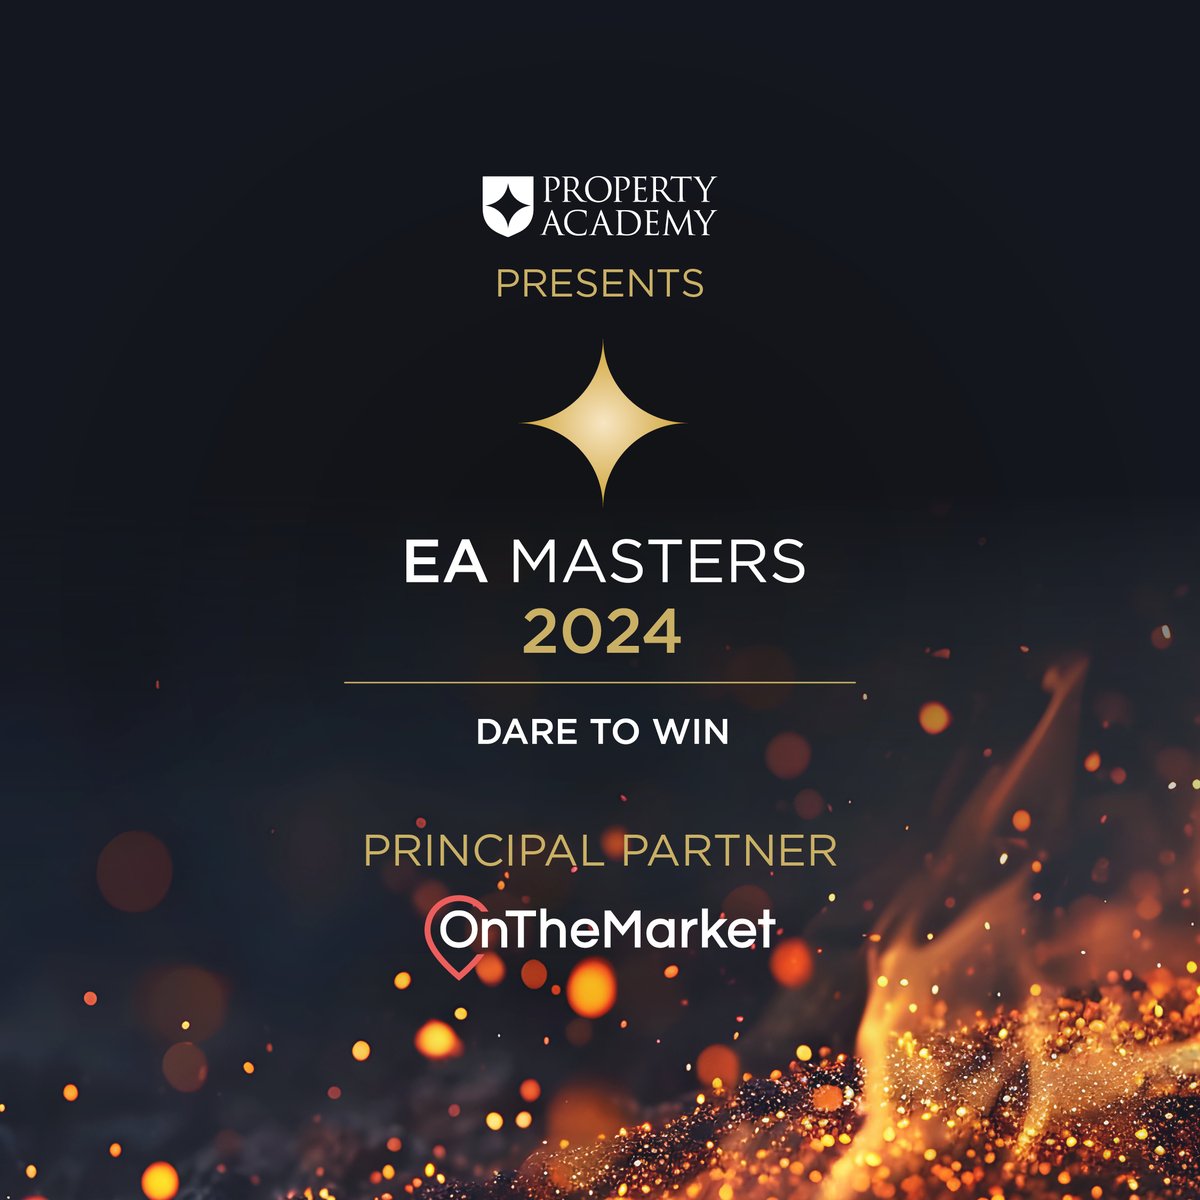 The EA Masters roadshows are back for 2024, presented by Property Academy 🔥 Dare to win and register for your free space at the roadshows here: rsvp.eamasters.co.uk